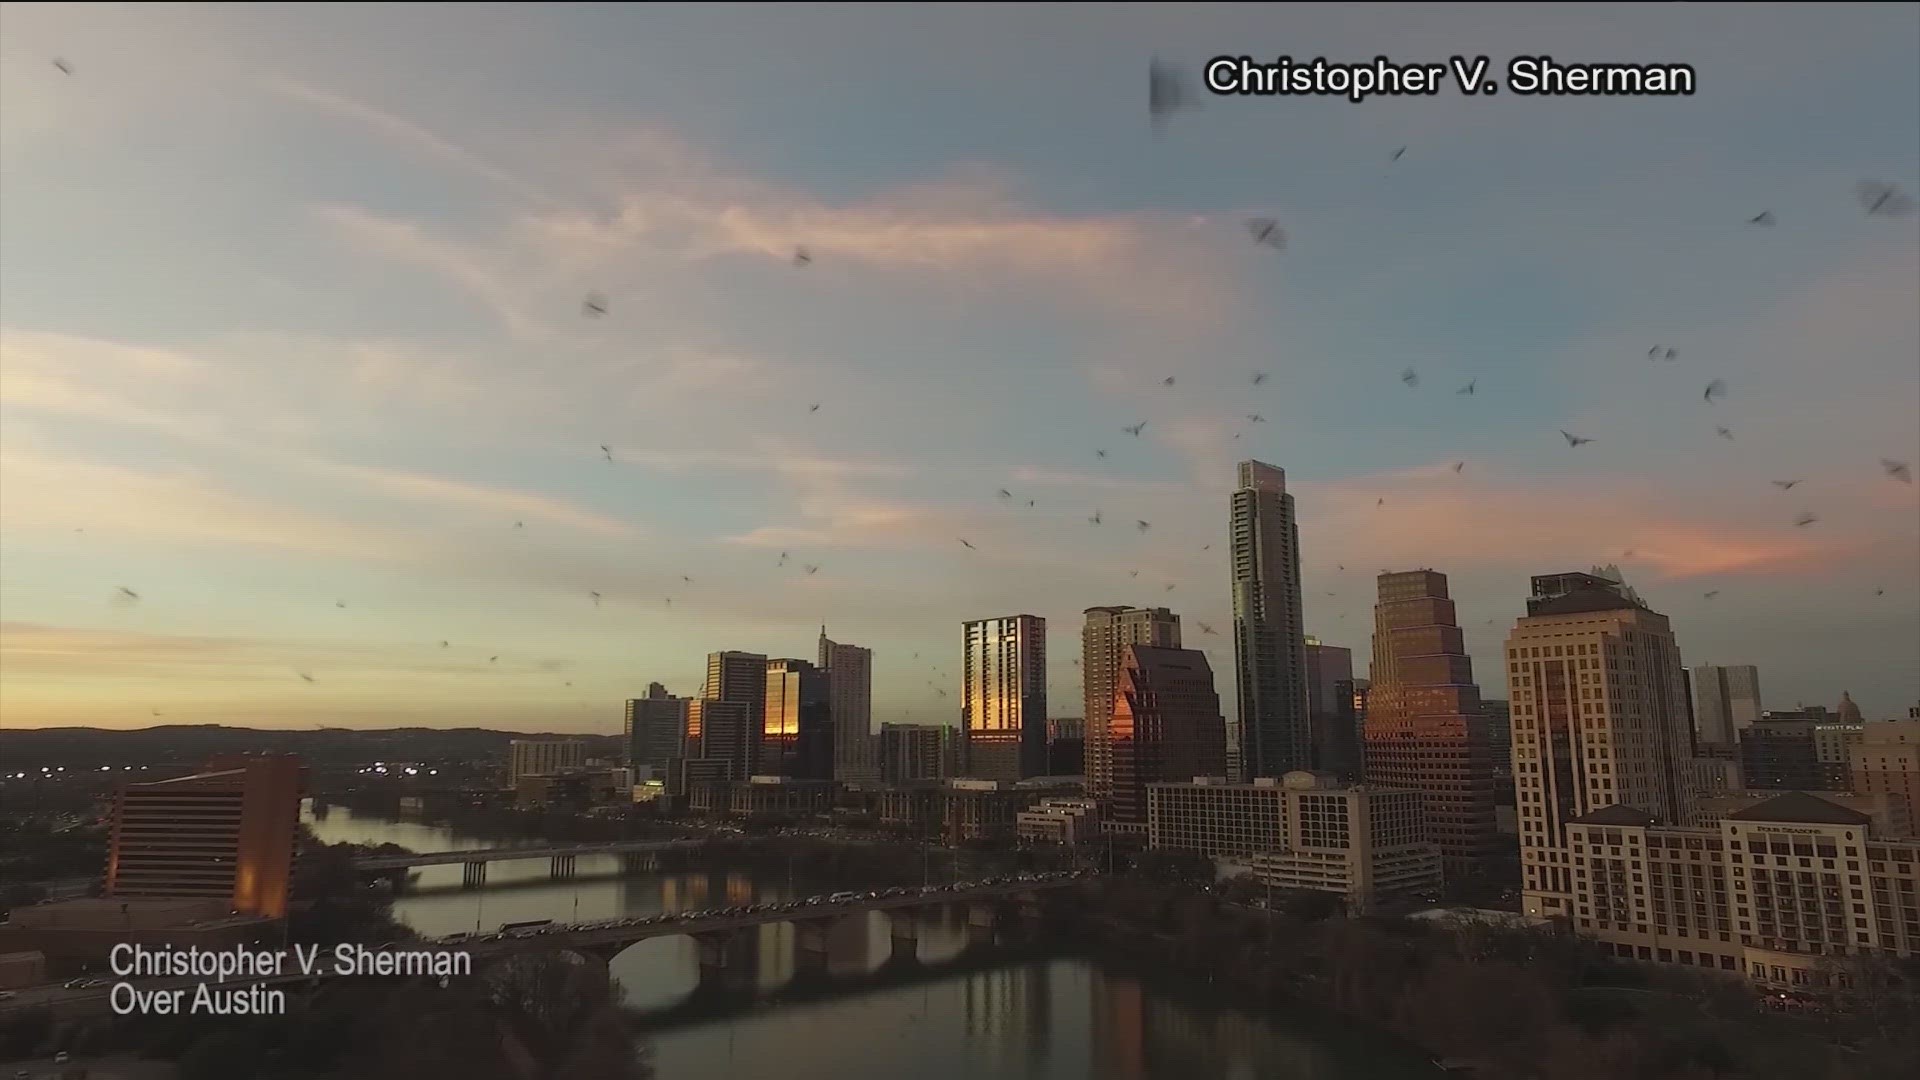 Austin celebrates the bat colony under the Congress Avenue Bridge with the annual Bat Fest event. Here's what to expect for Saturday's event.